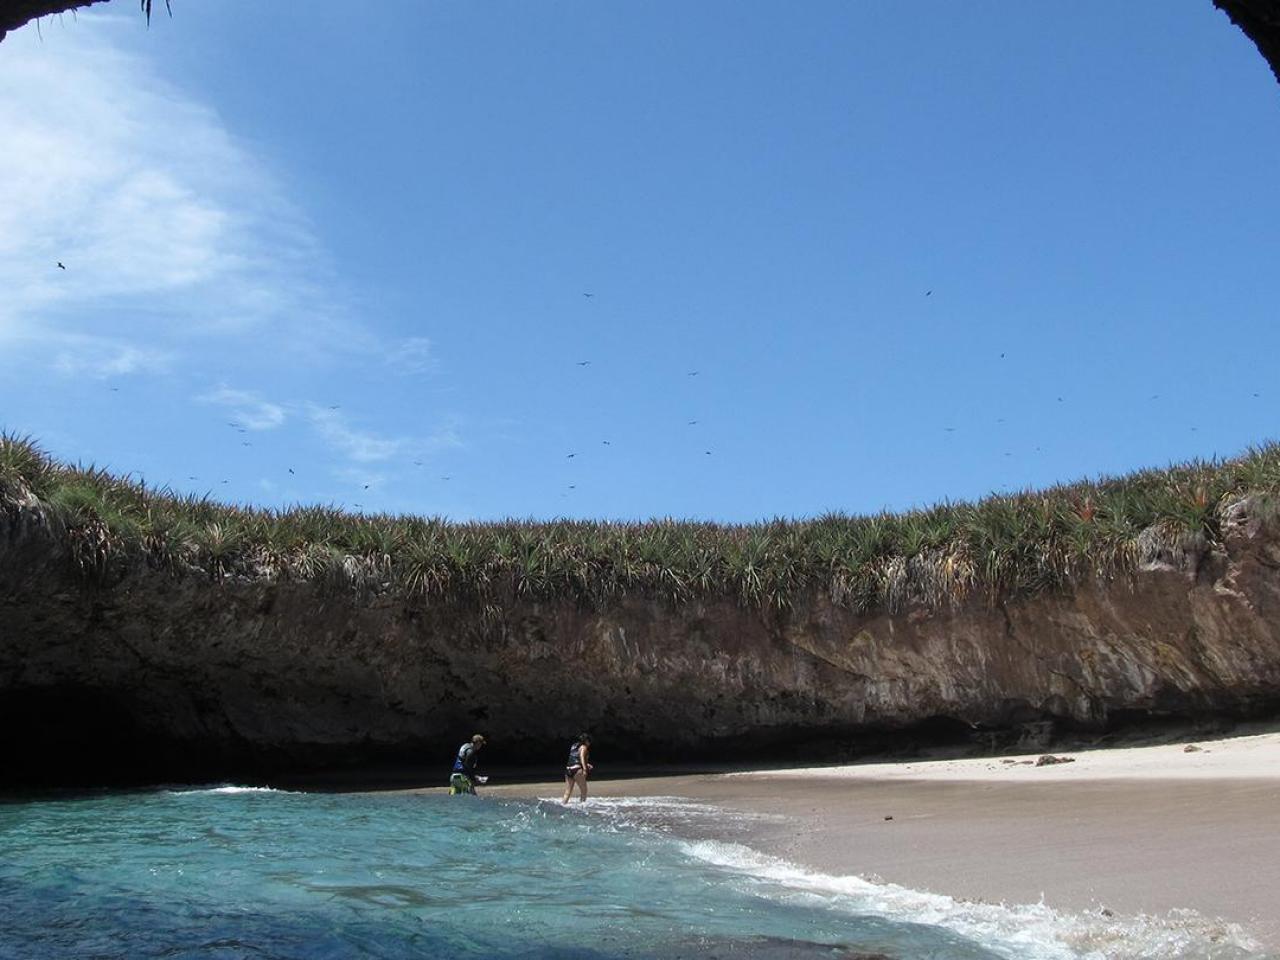 Theres A Hidden Beach In Mexico Called Playa del Amor Travel and Exploration Discovery photo image